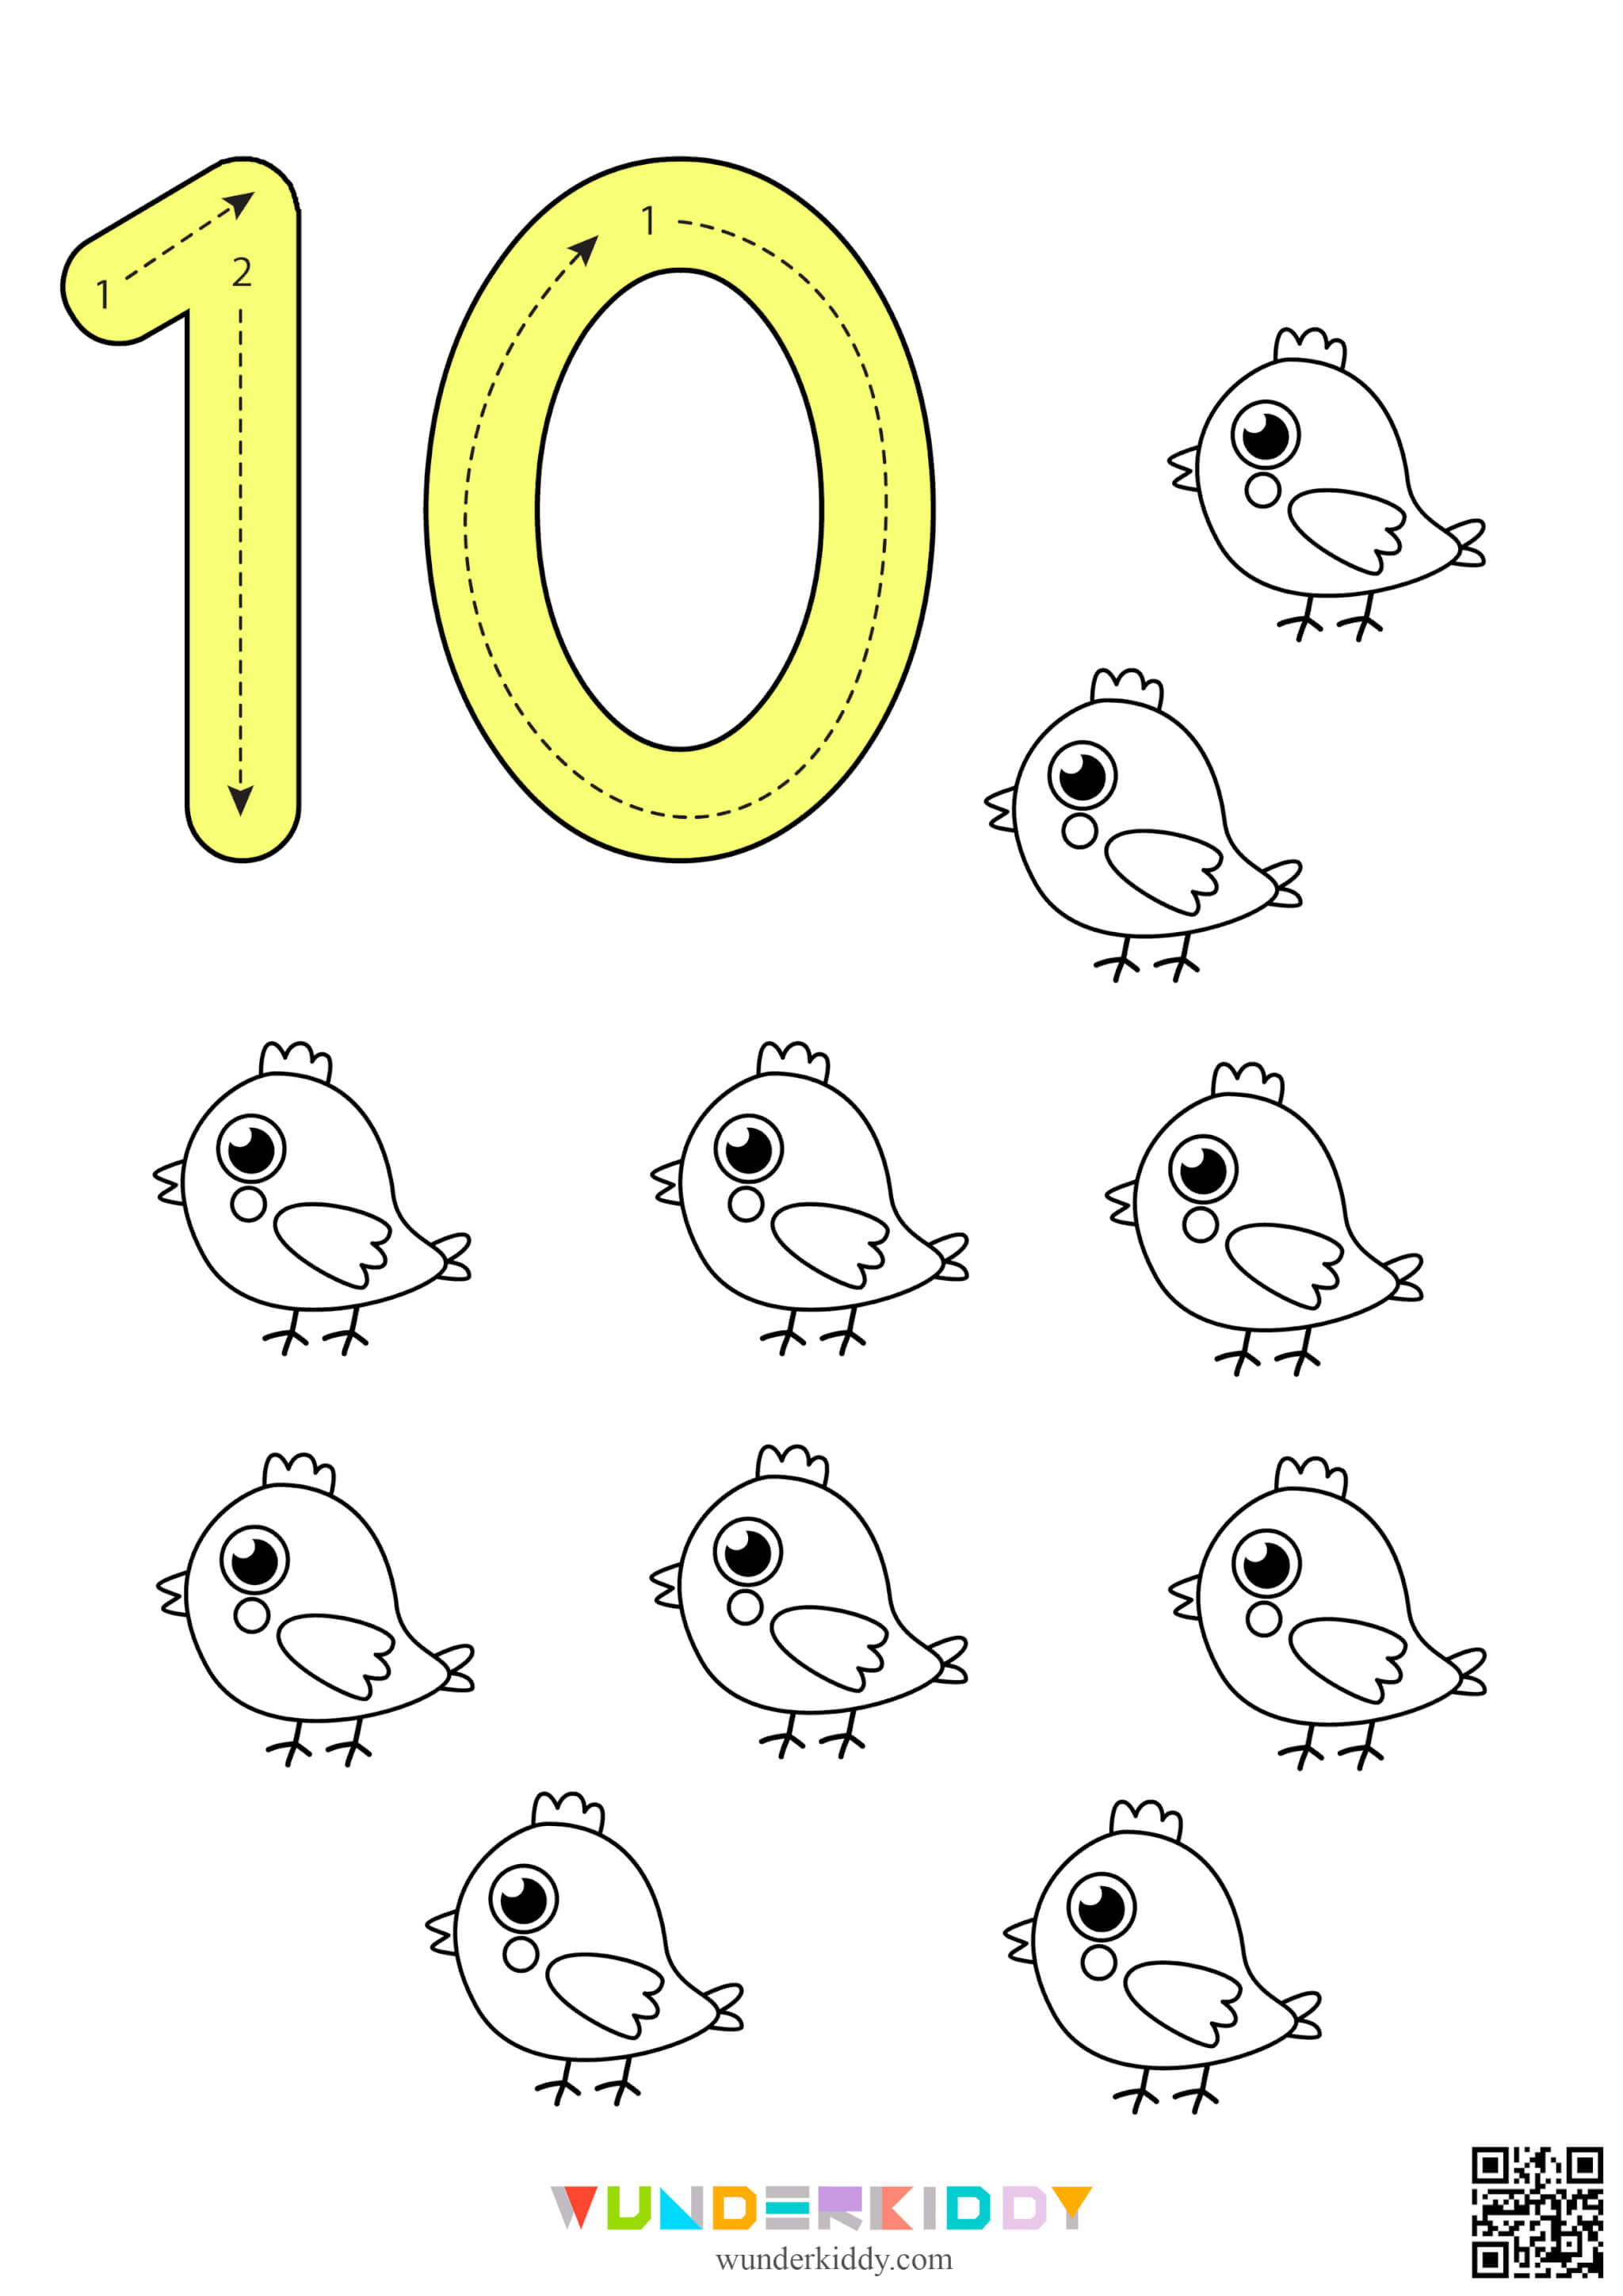 Worksheets «Count and color» - Image 11